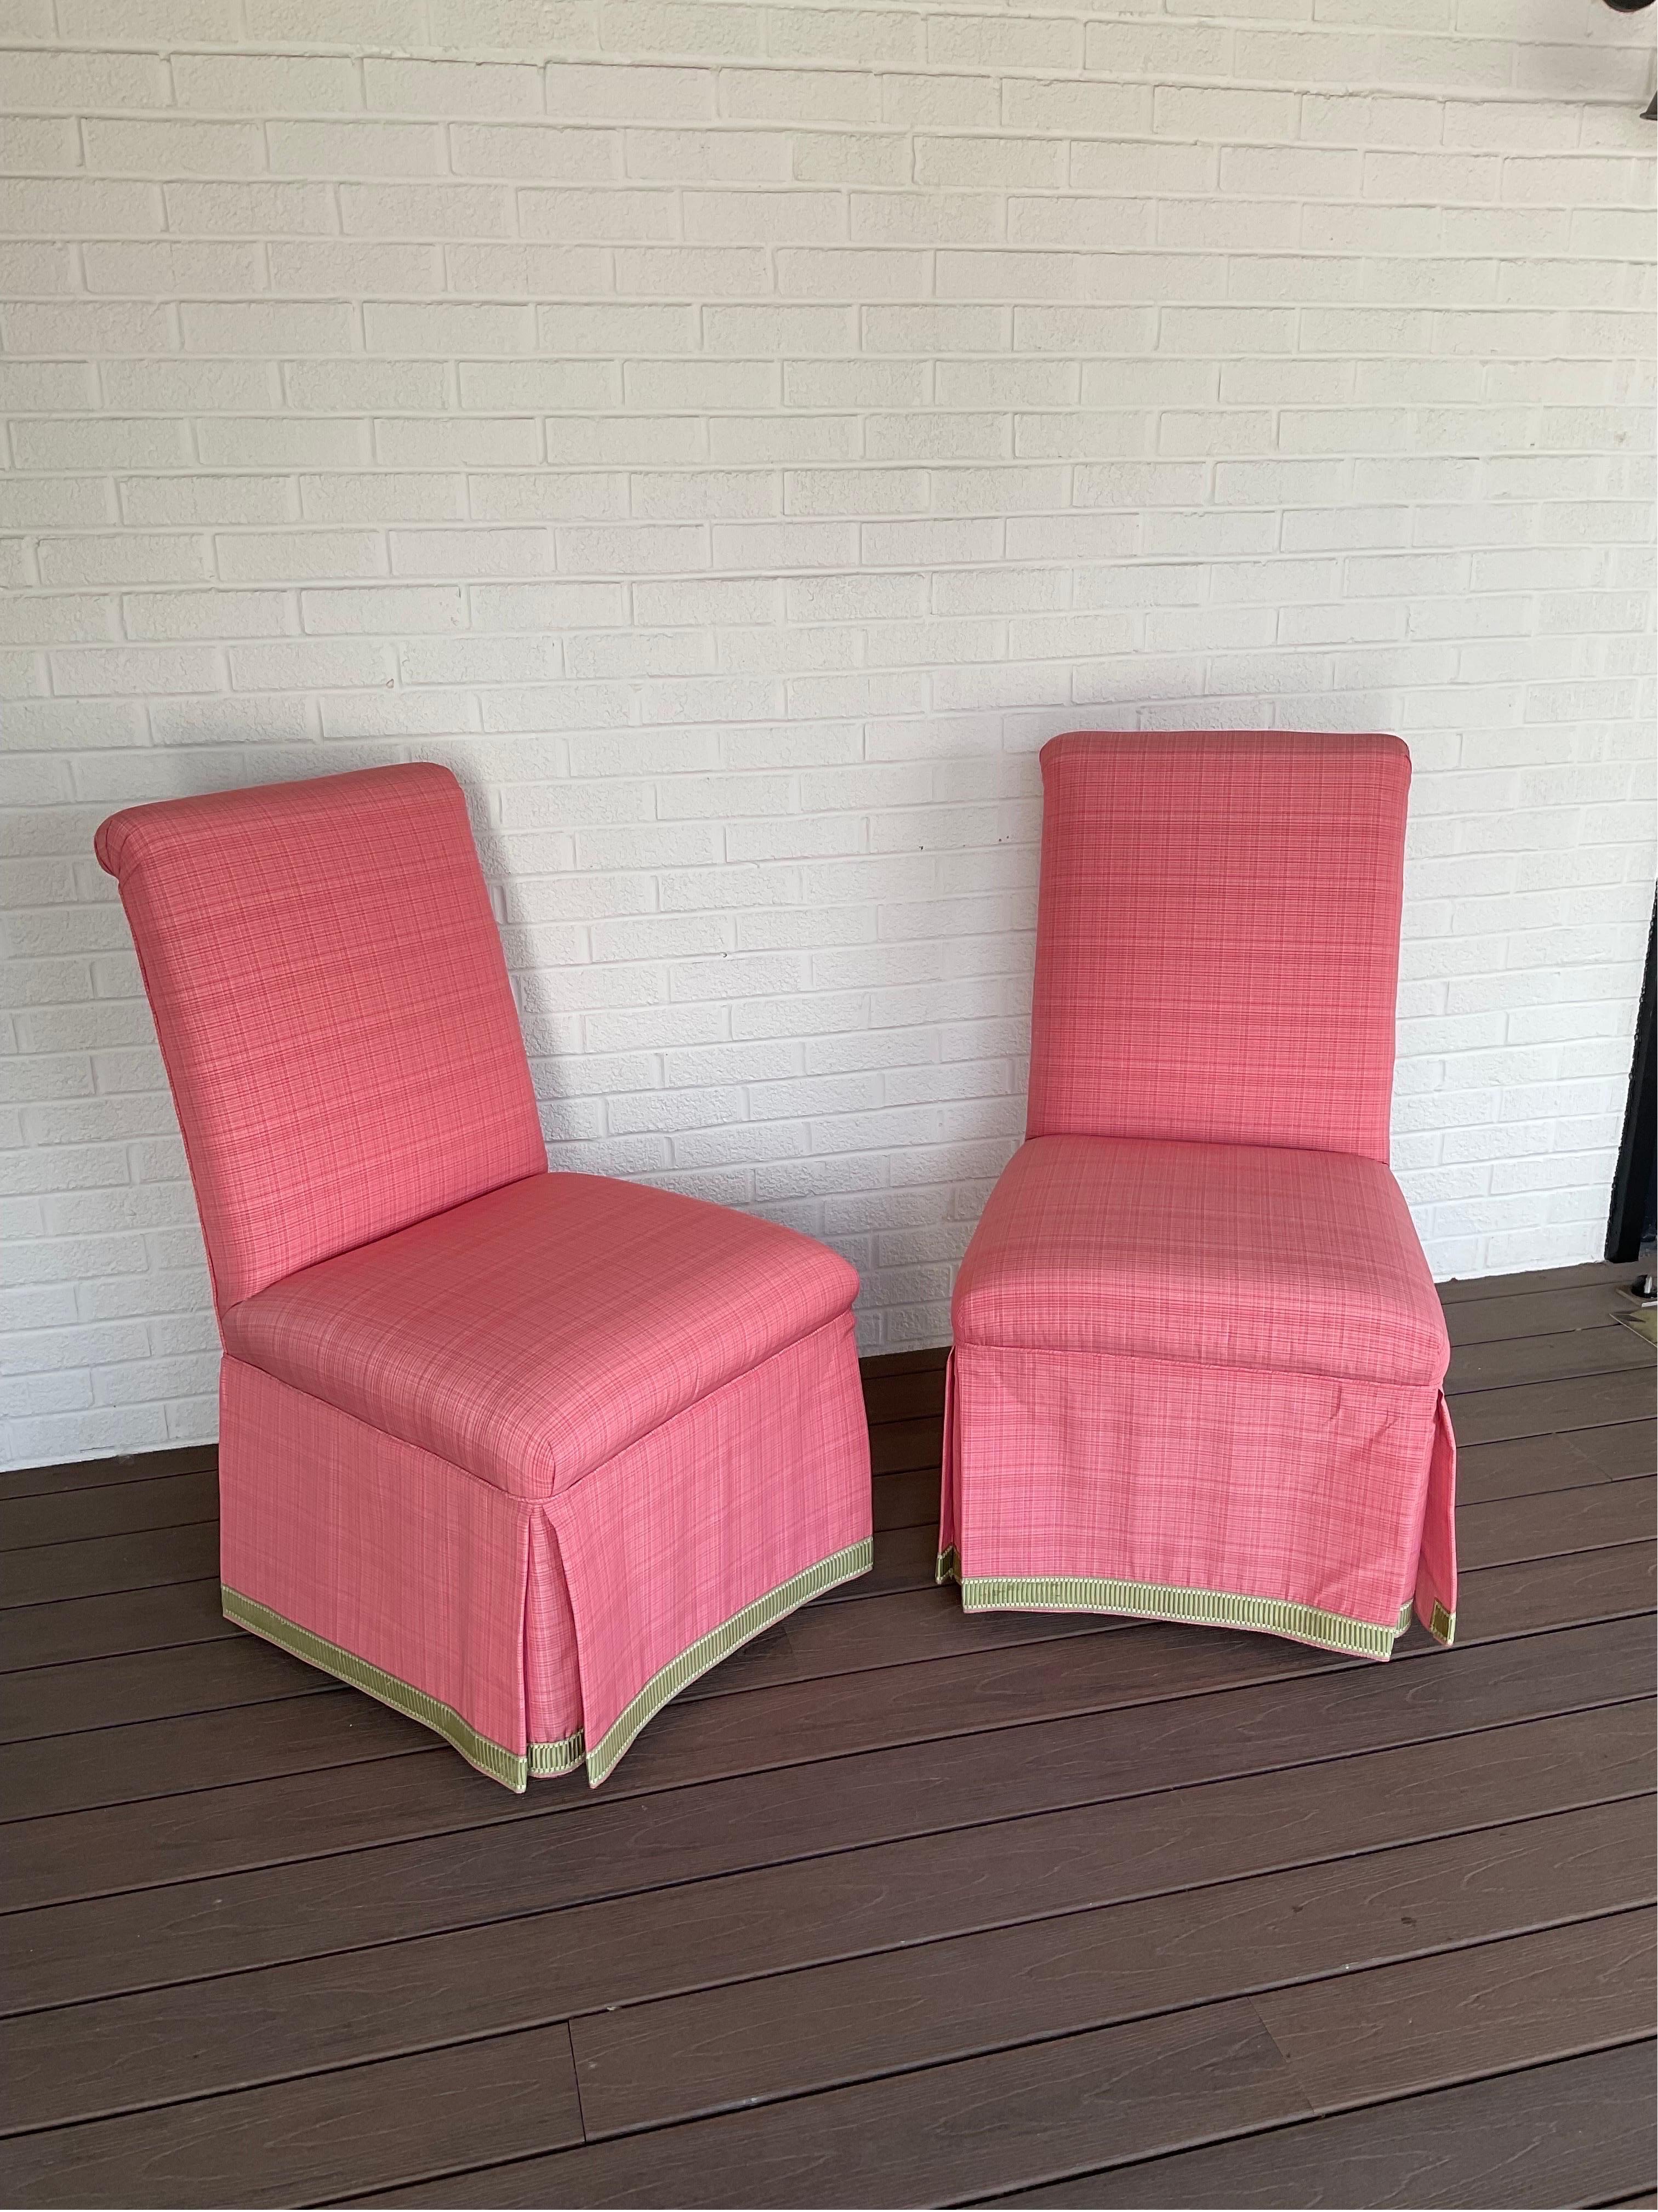 Brilliant pair of Custom made parsons chairs in a peachy salmon Lee Jofa fine plaid with a contrasting celery green trim on the shirt. These are beautiful and pristine.


Condition Disclosure:
Please understand nearly all of our inventory is